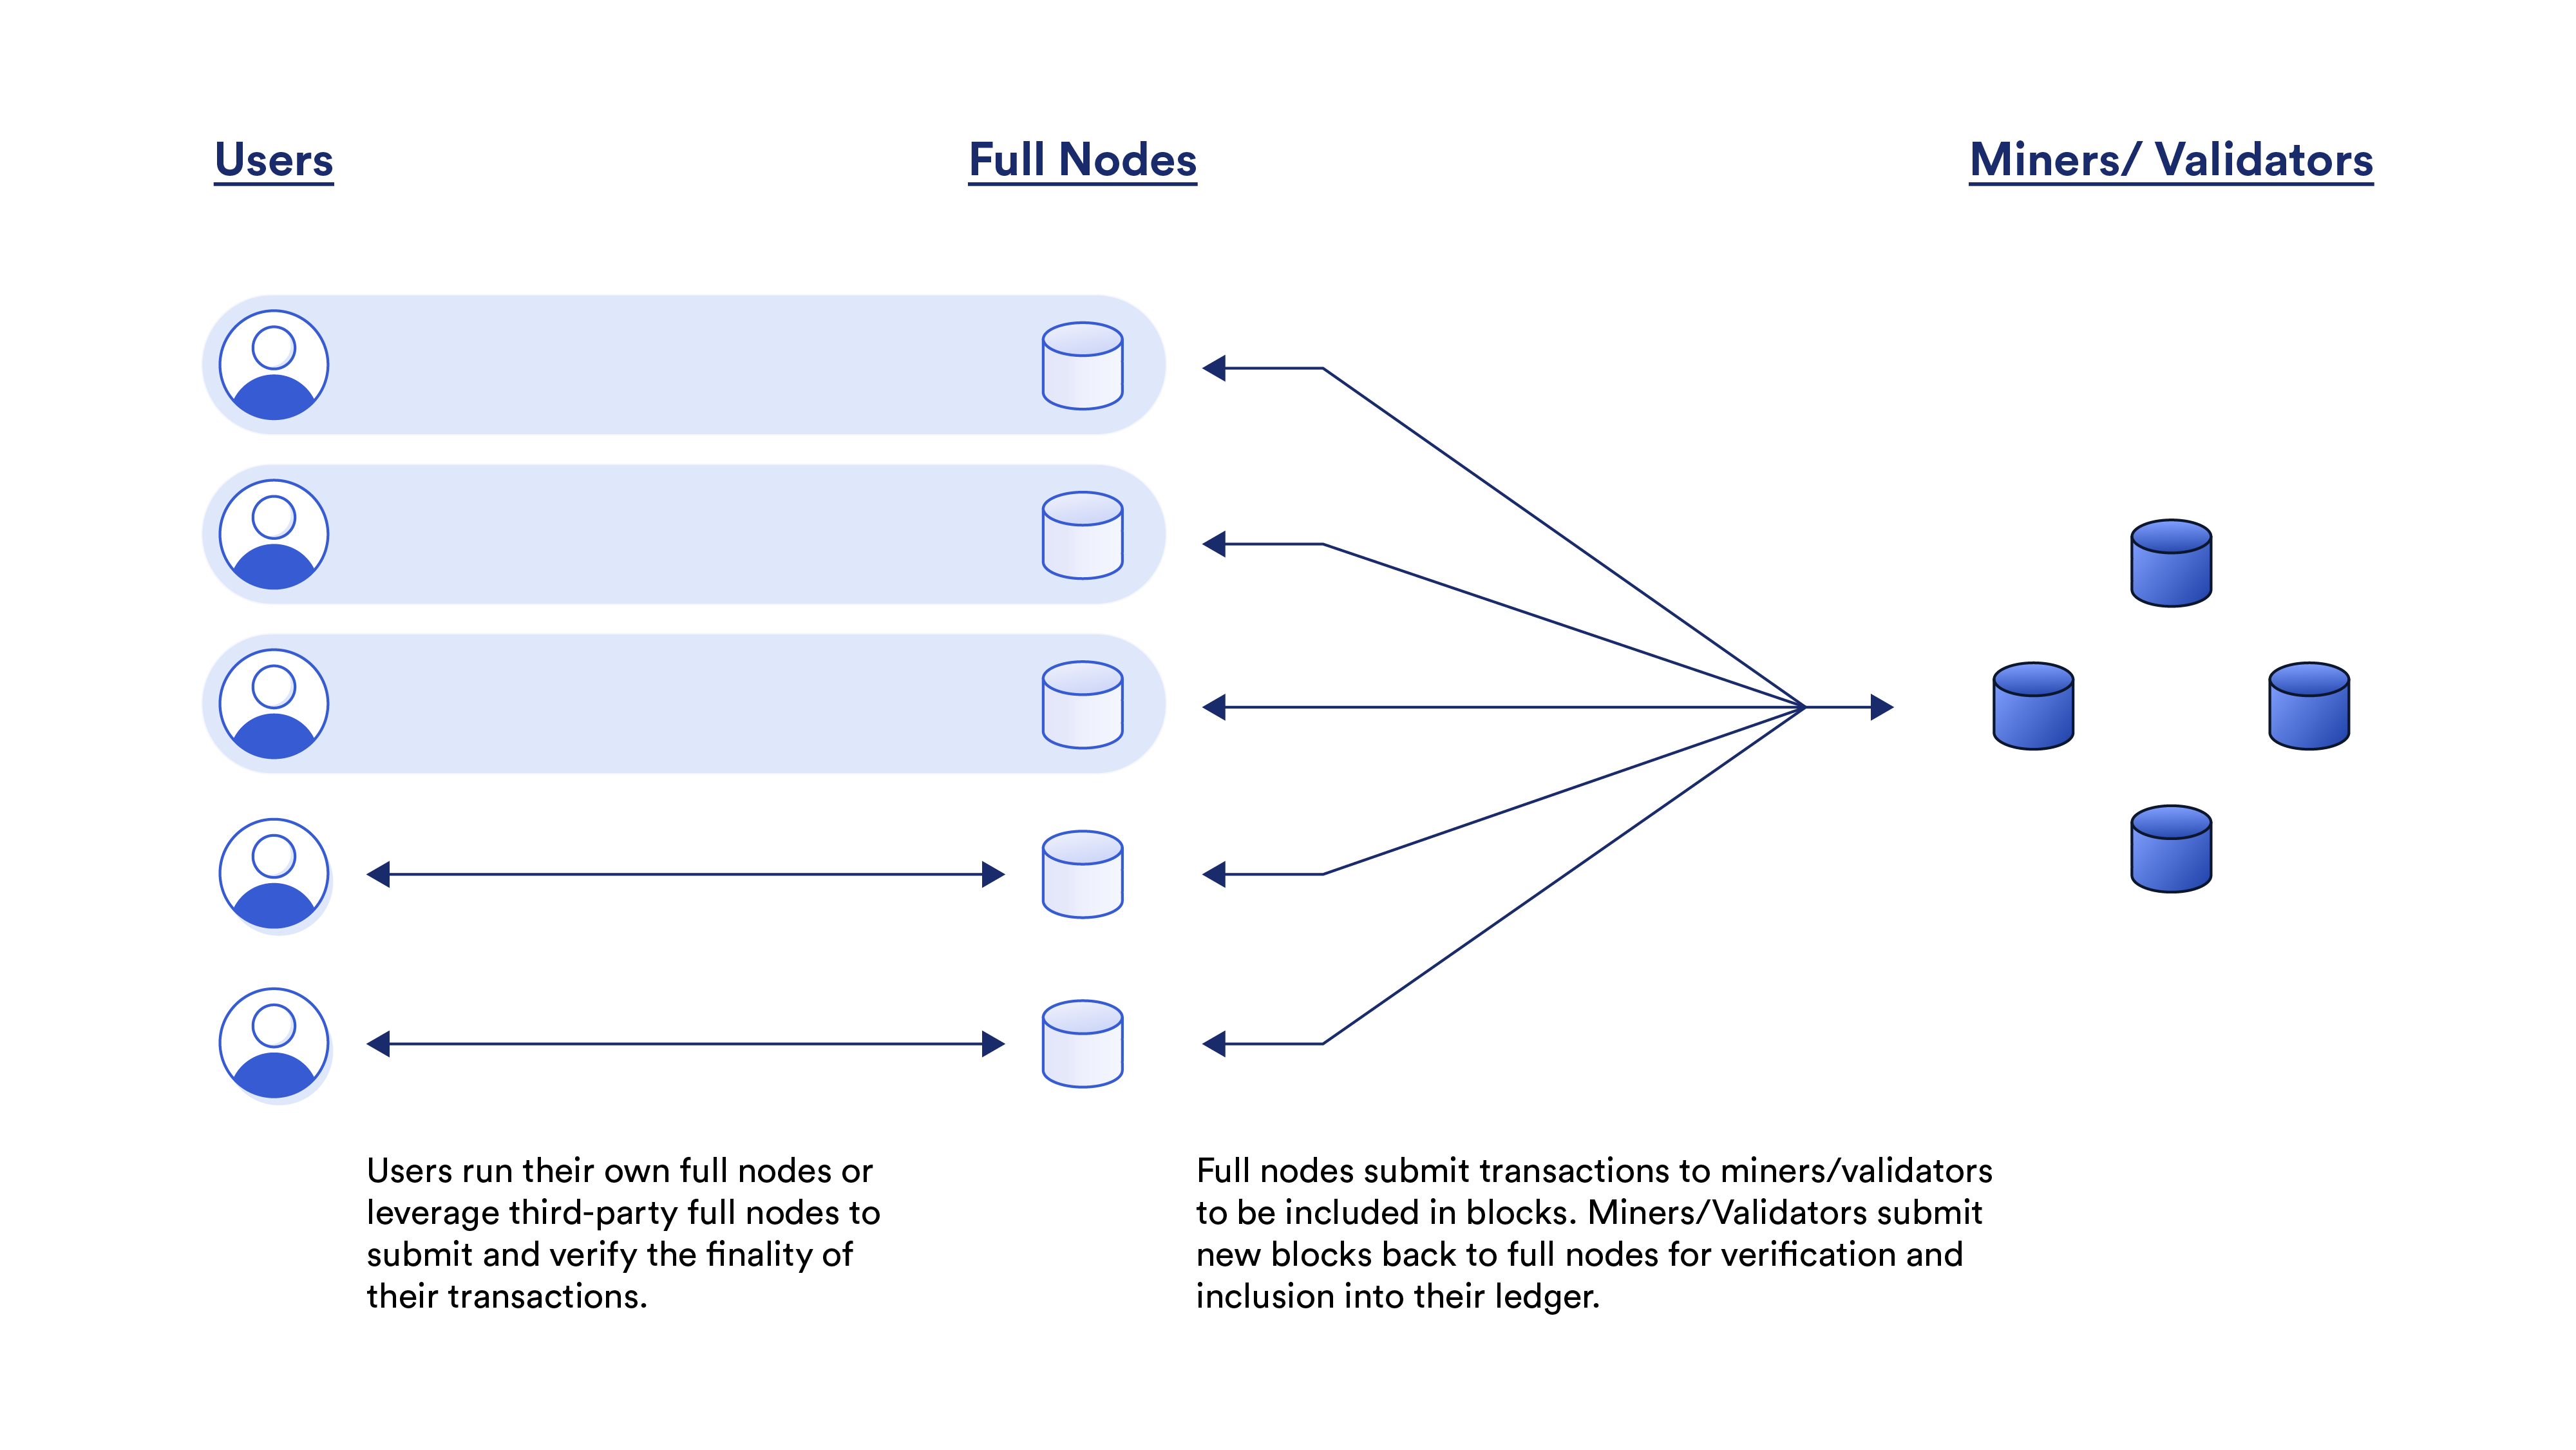 Distinction between block producers and full nodes